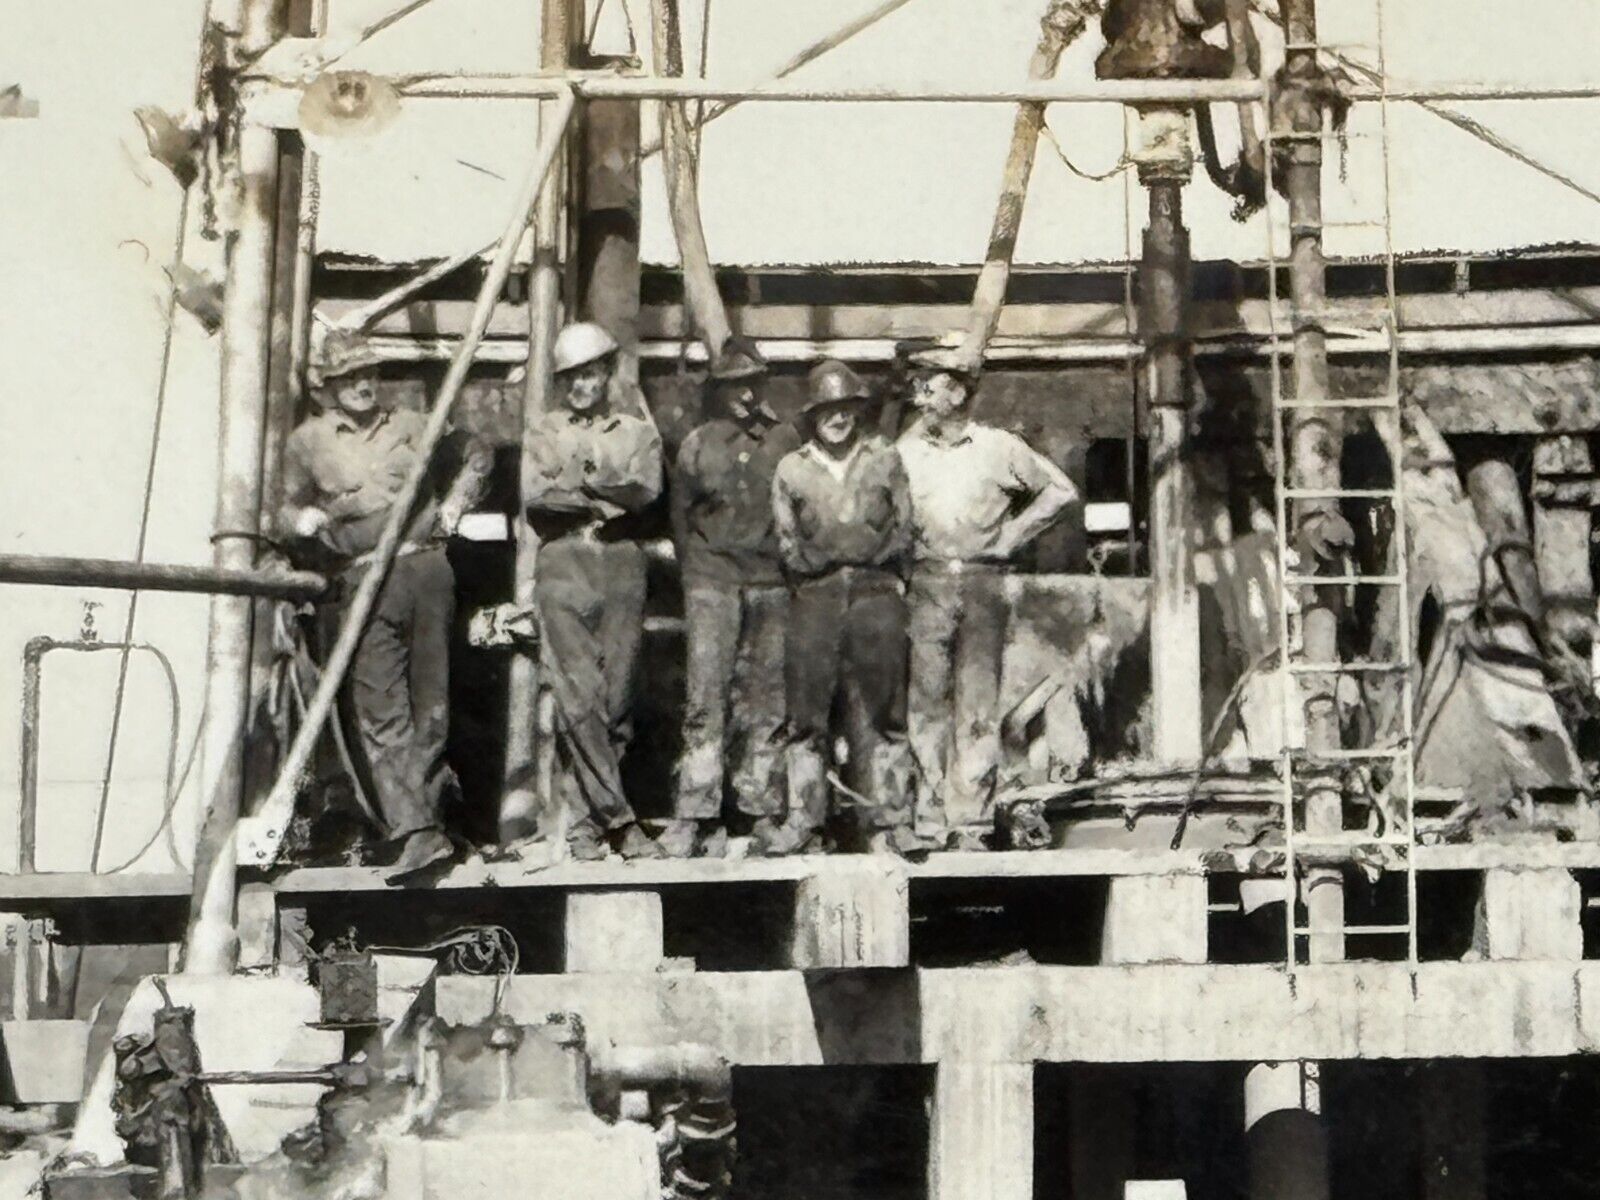 2M Photograph 1938 Group Photo Men Working On Oil Rig Harbor City 1928